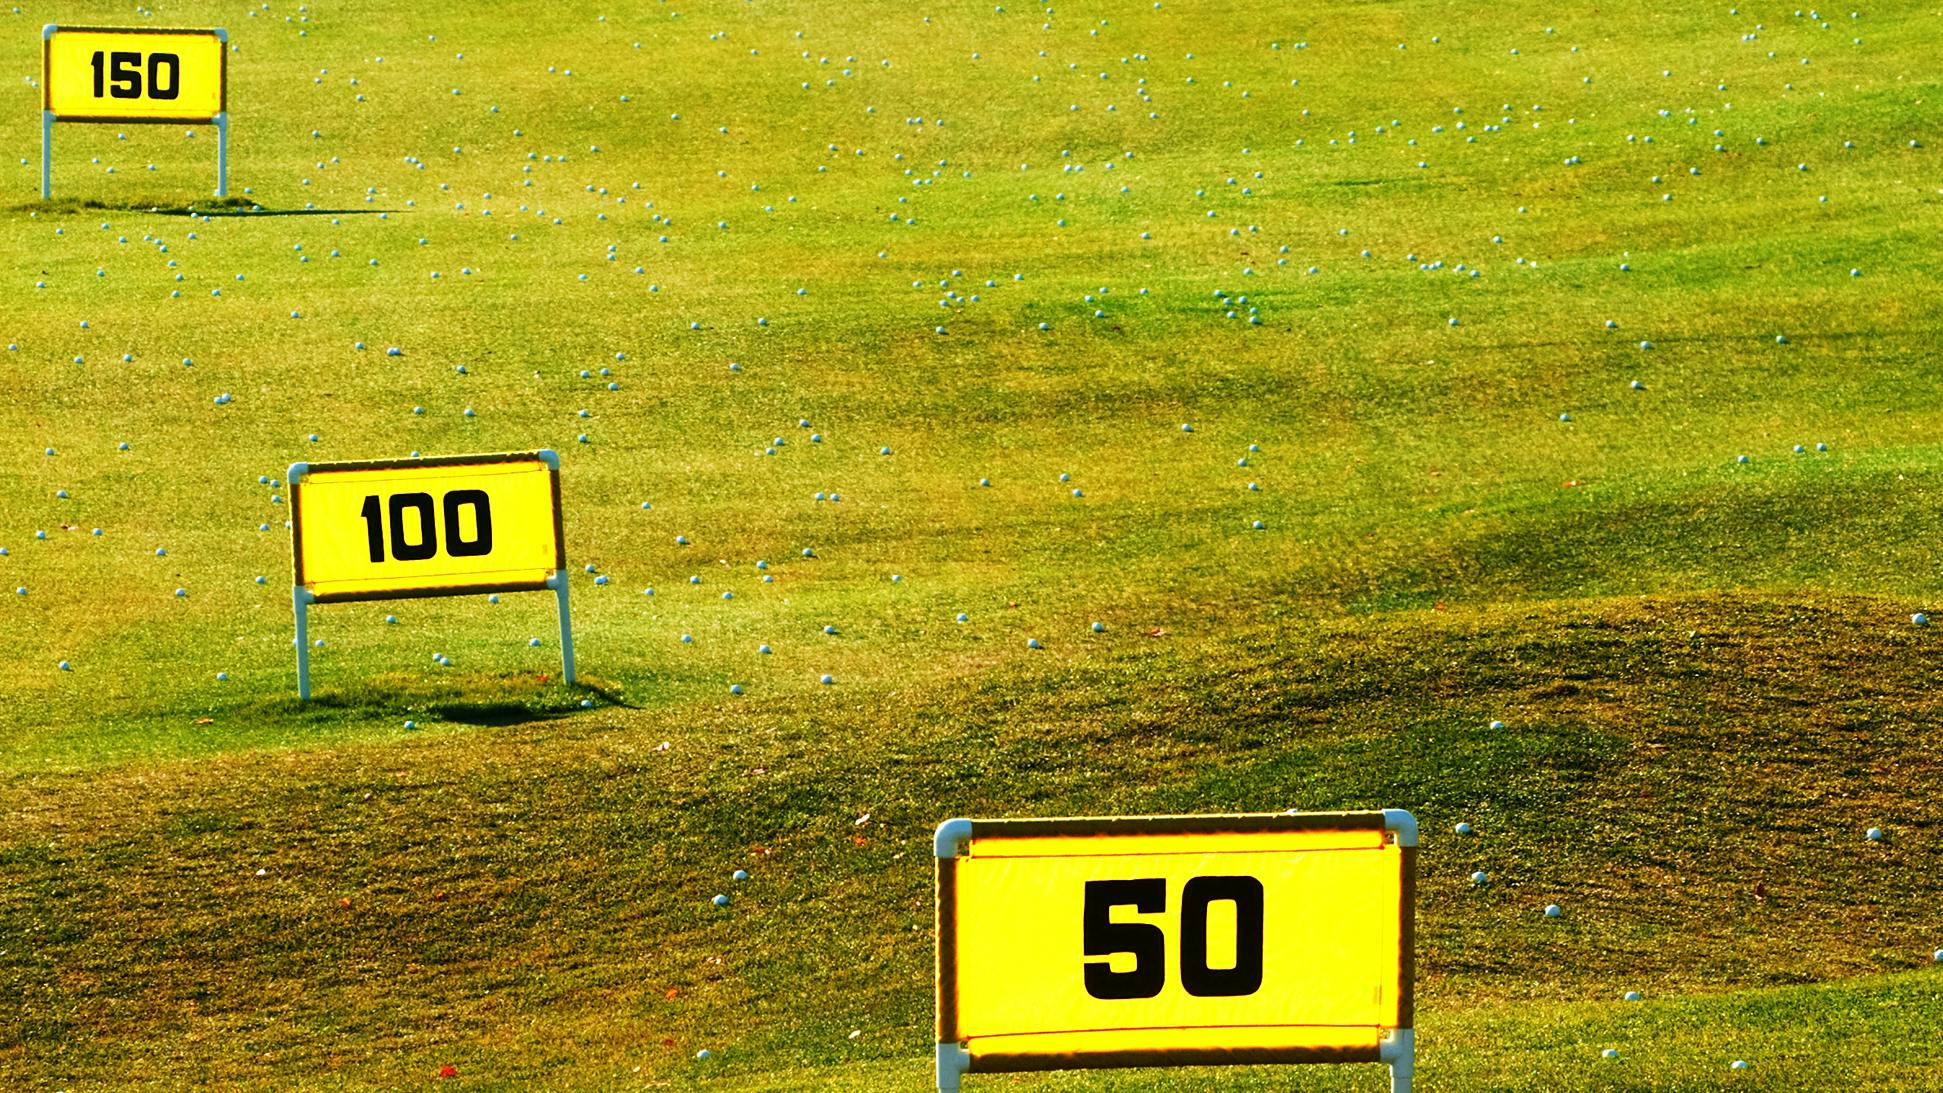 Yellow yardage signs on a golf course. The course is sprinkled with golf balls. 